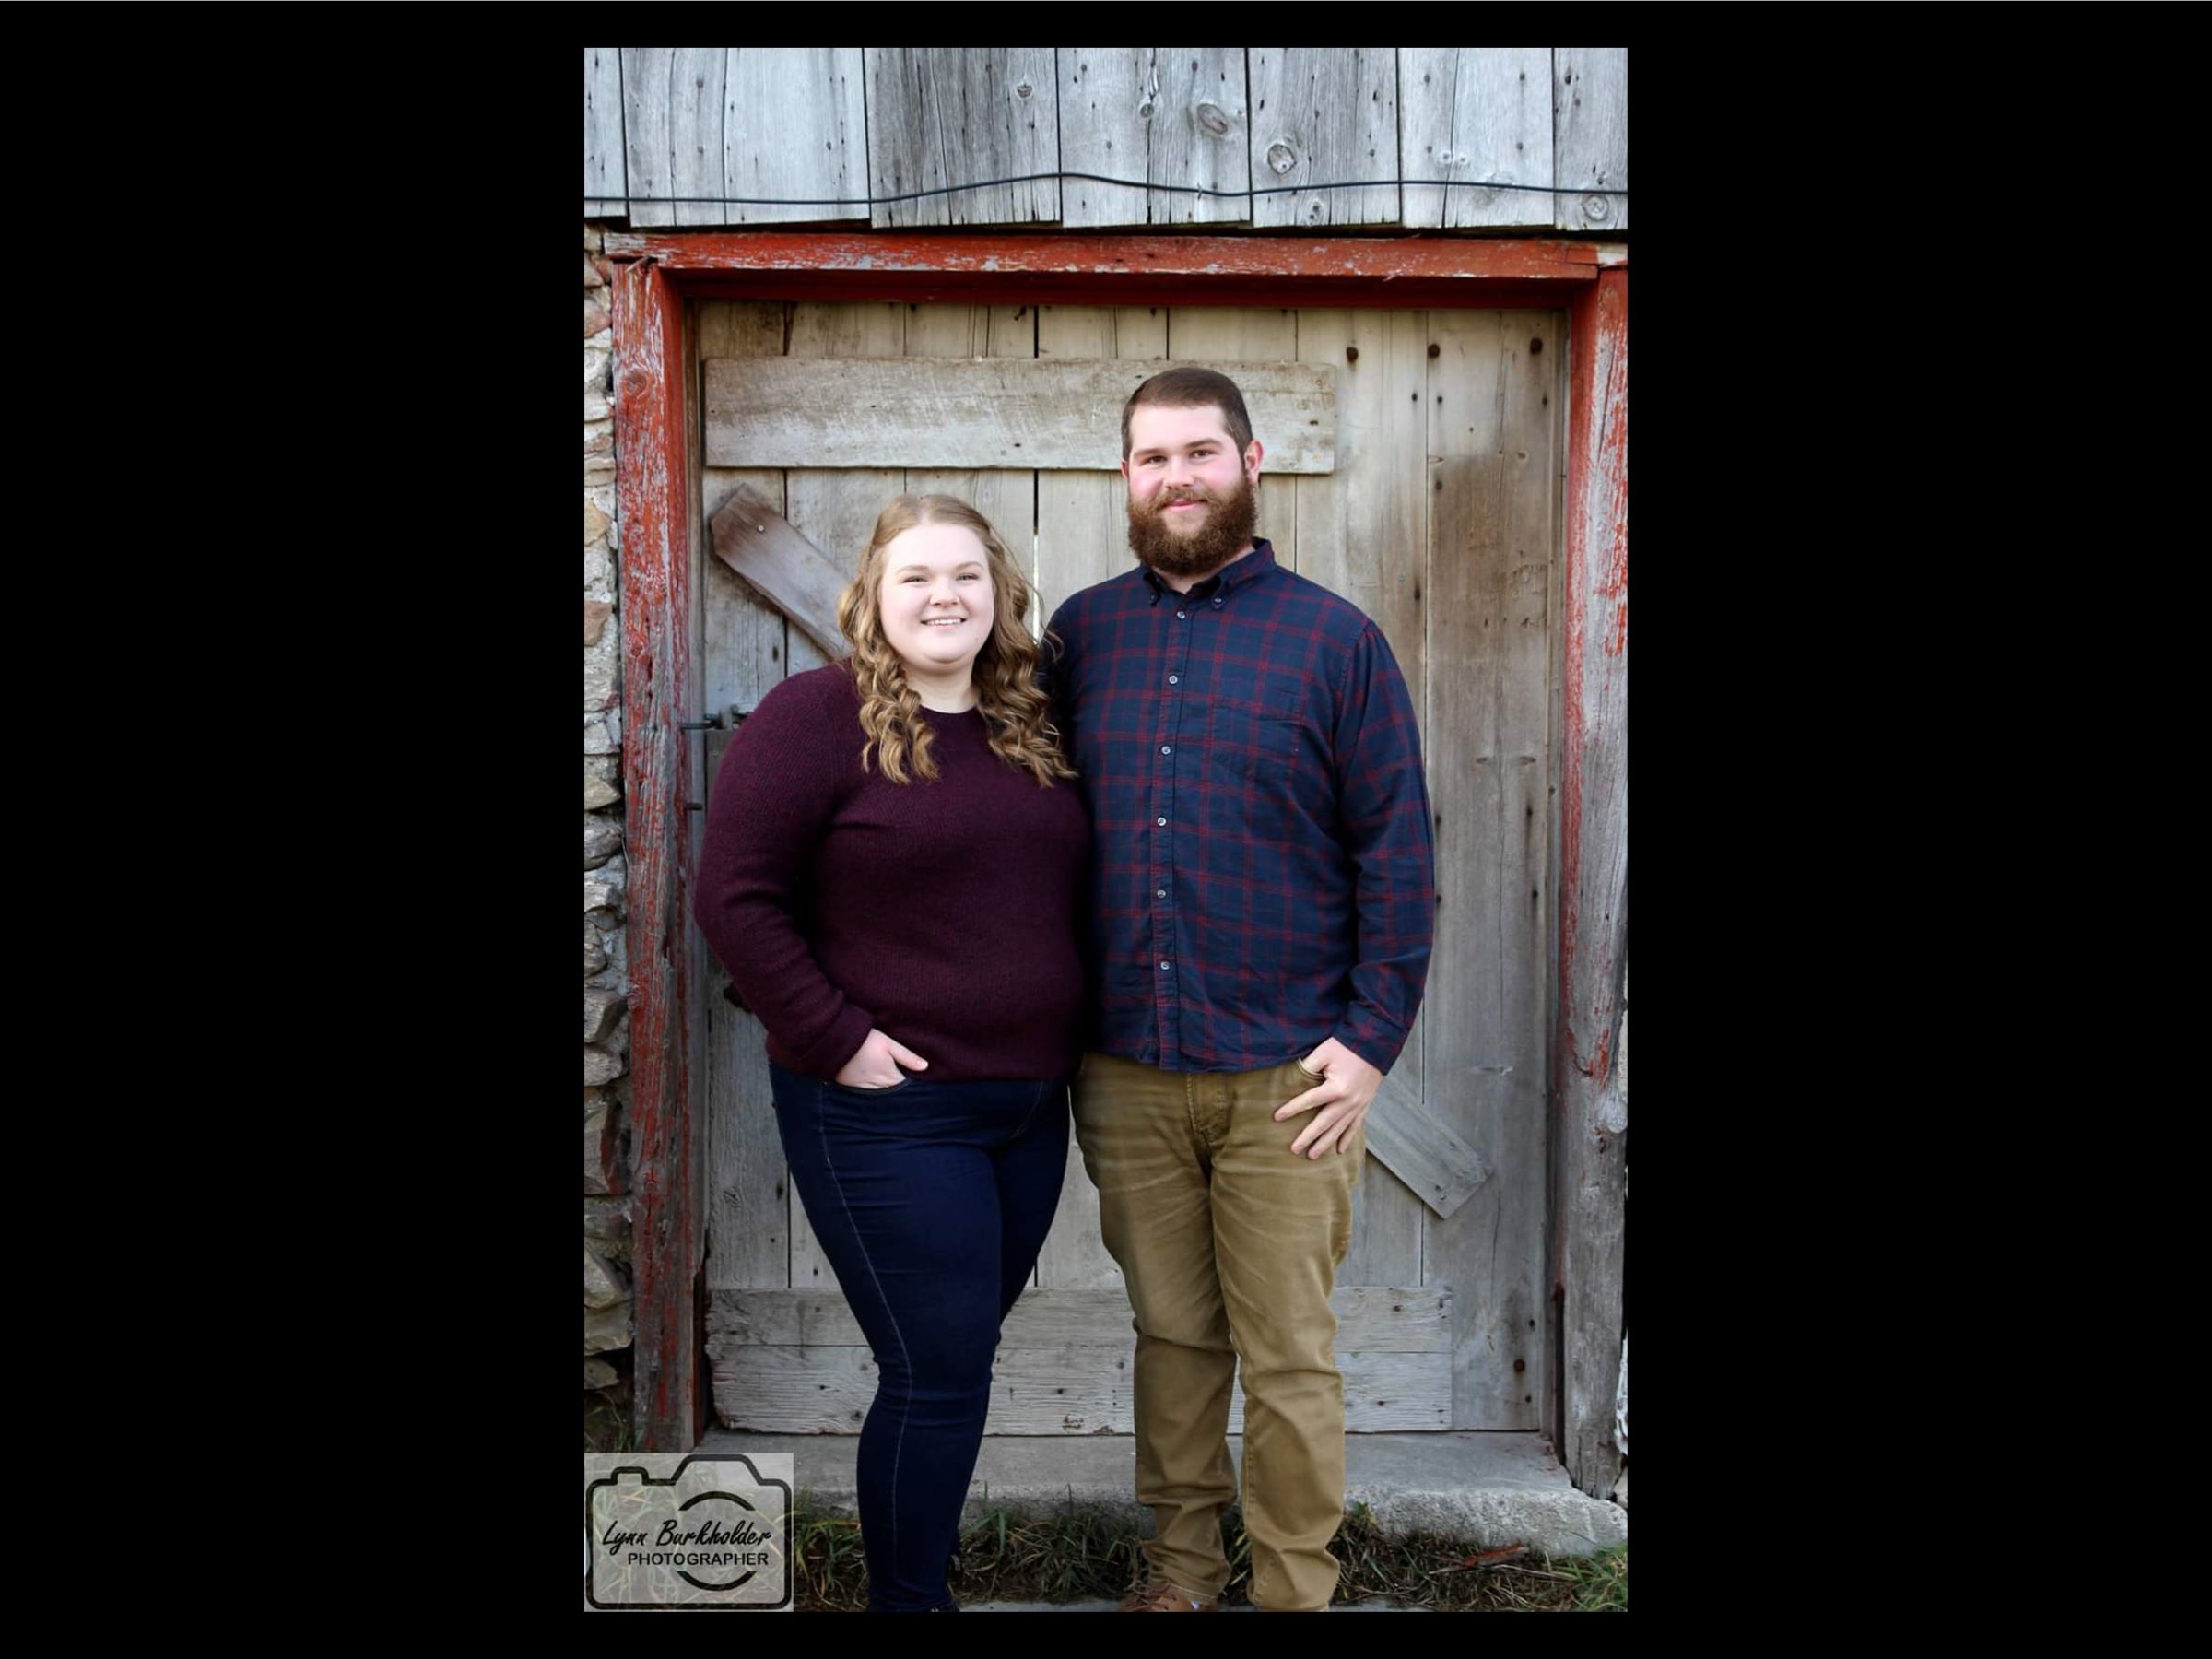 A young woman and man are standing outside in front of a barn door smiling, with one arm around each other and the other hand in their pocket.